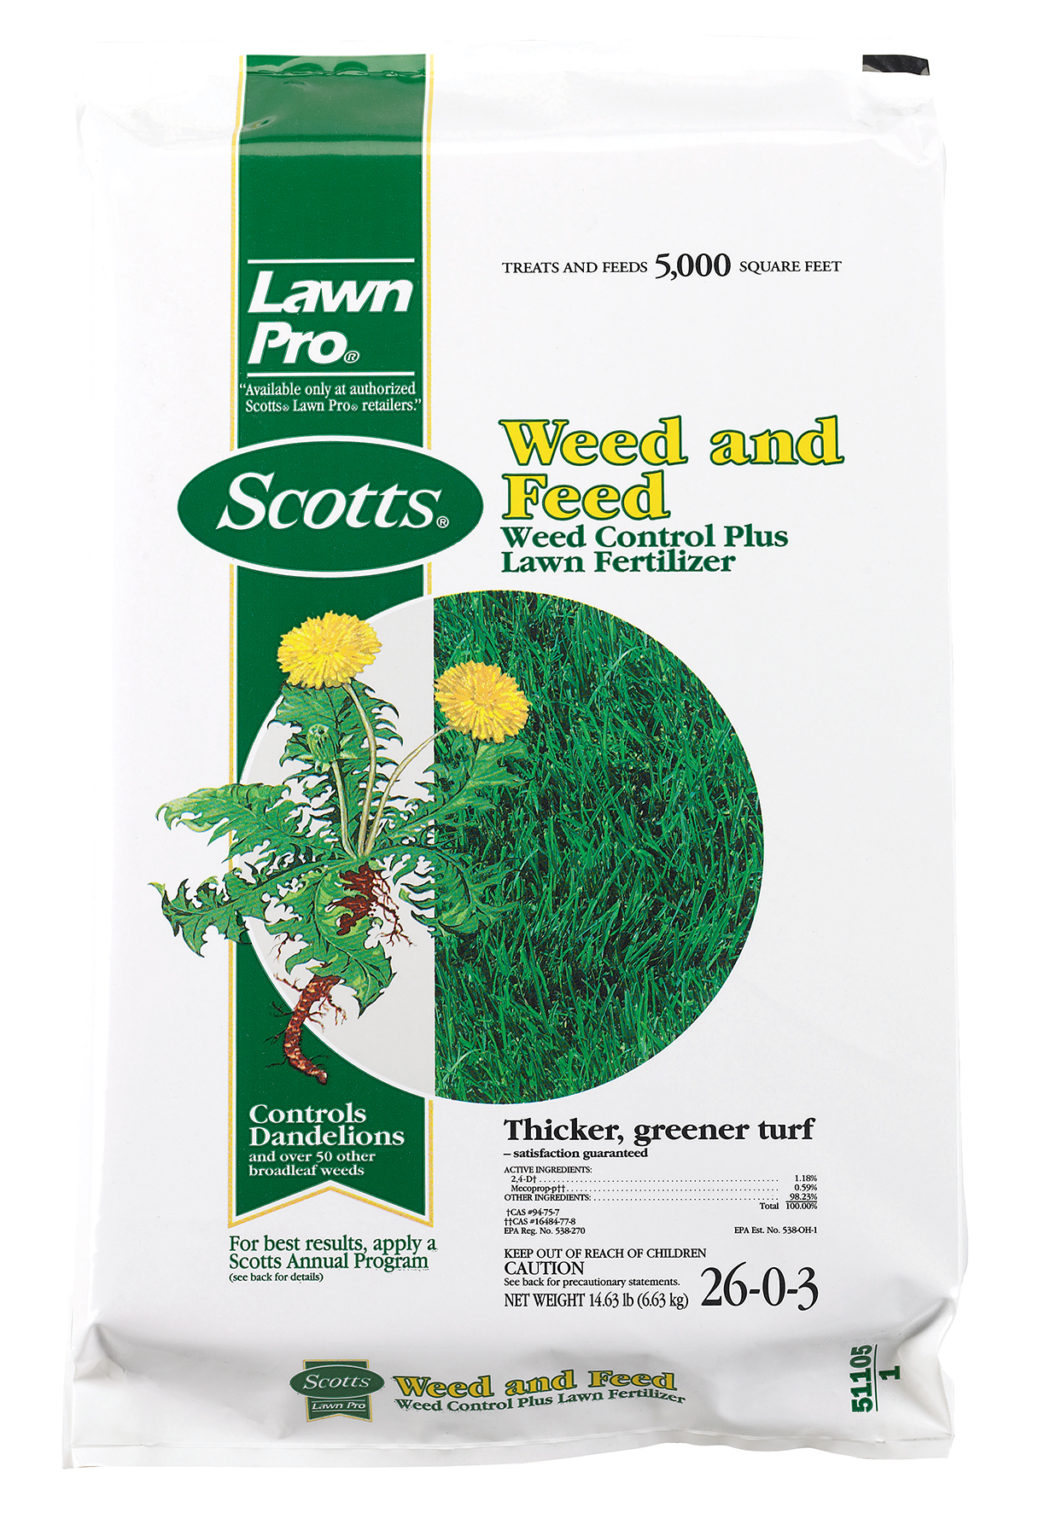 order-scotts-lawn-pro-weed-and-feed-today-black-diamond